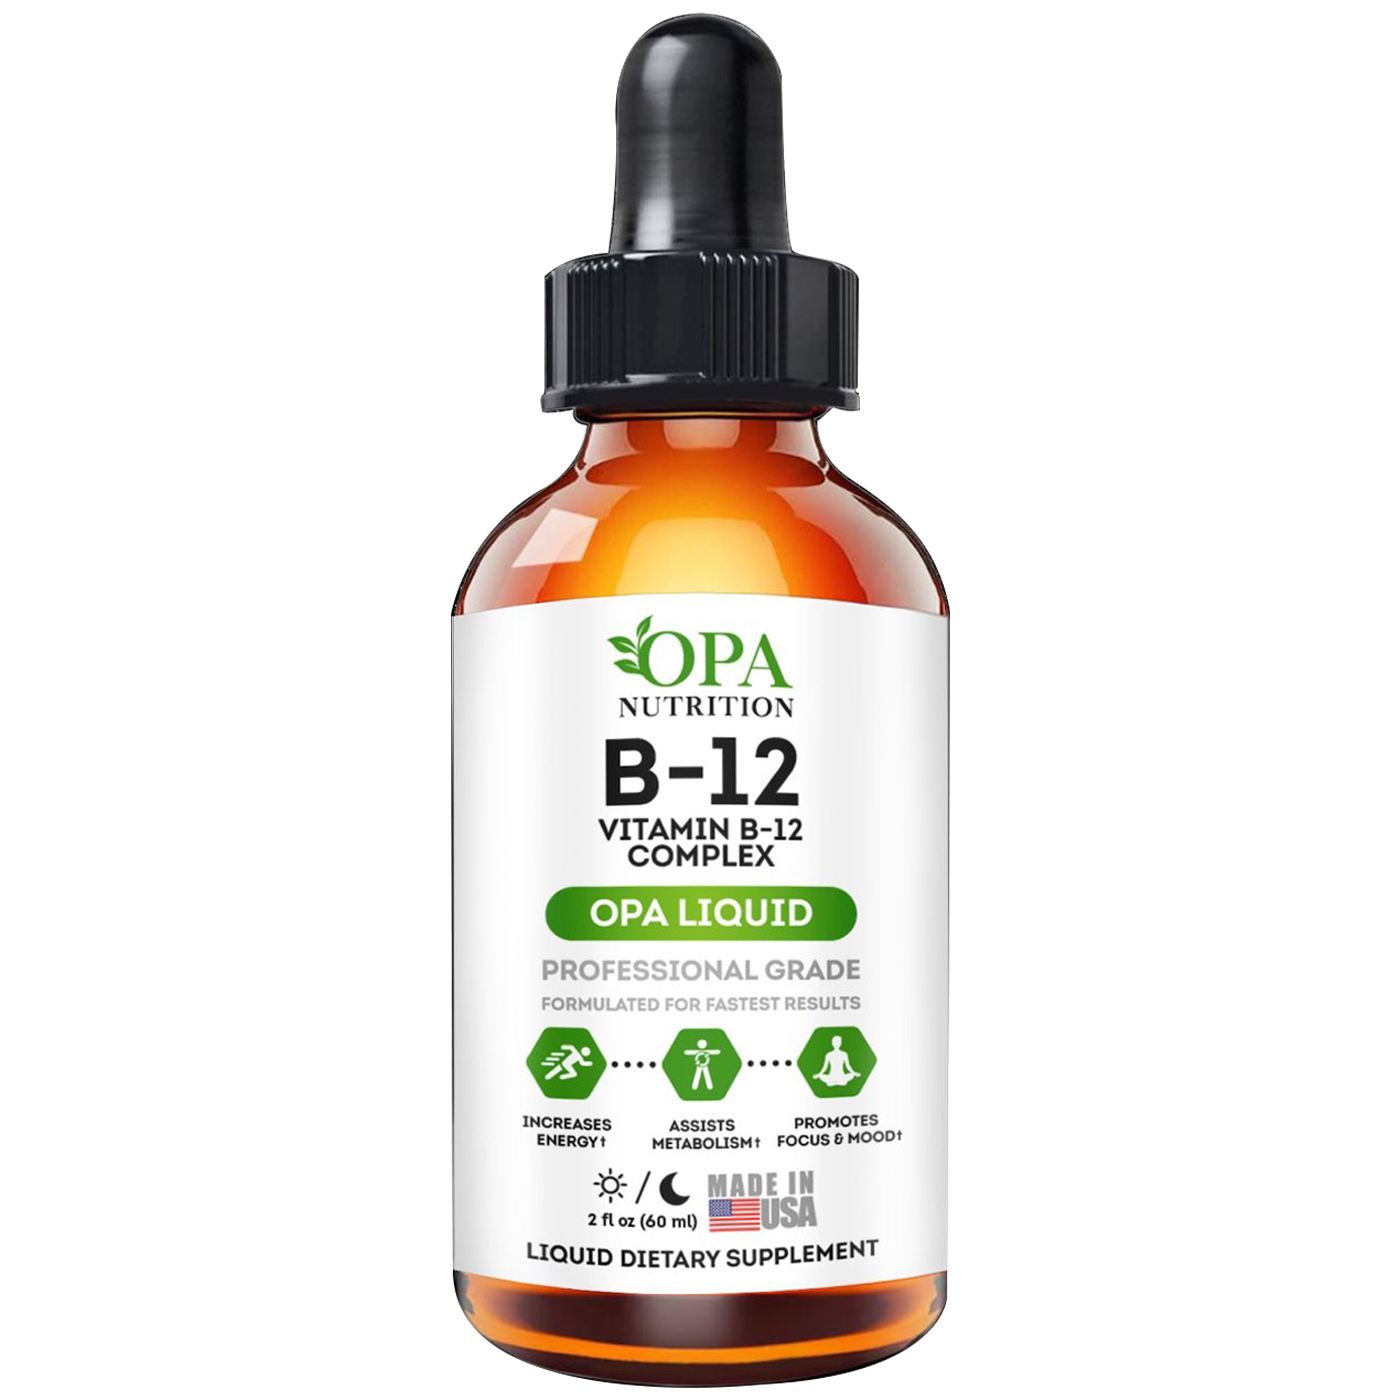 Liquid Vitamin B12 Supplement for Energy, Mood, and Focus - 60 ml Front ingredients